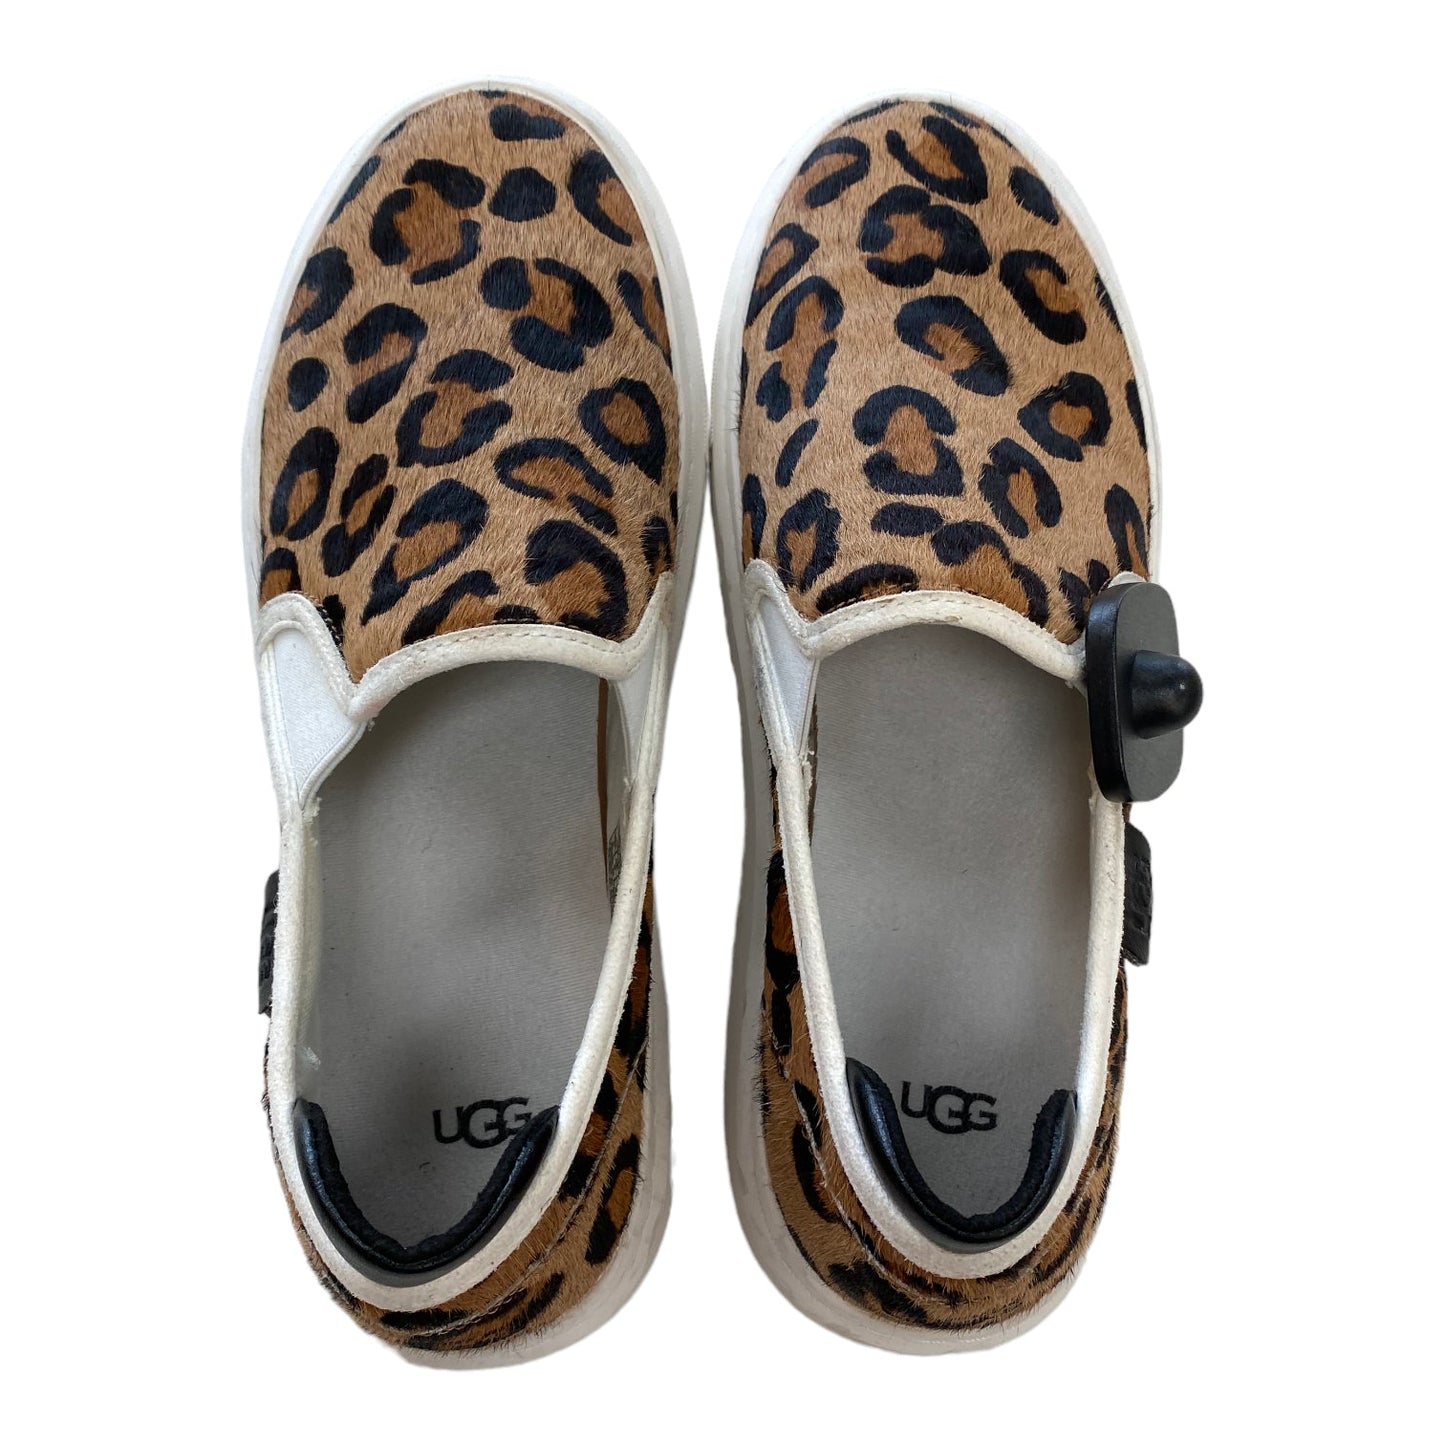 Animal Print Shoes Sneakers Ugg, Size 8